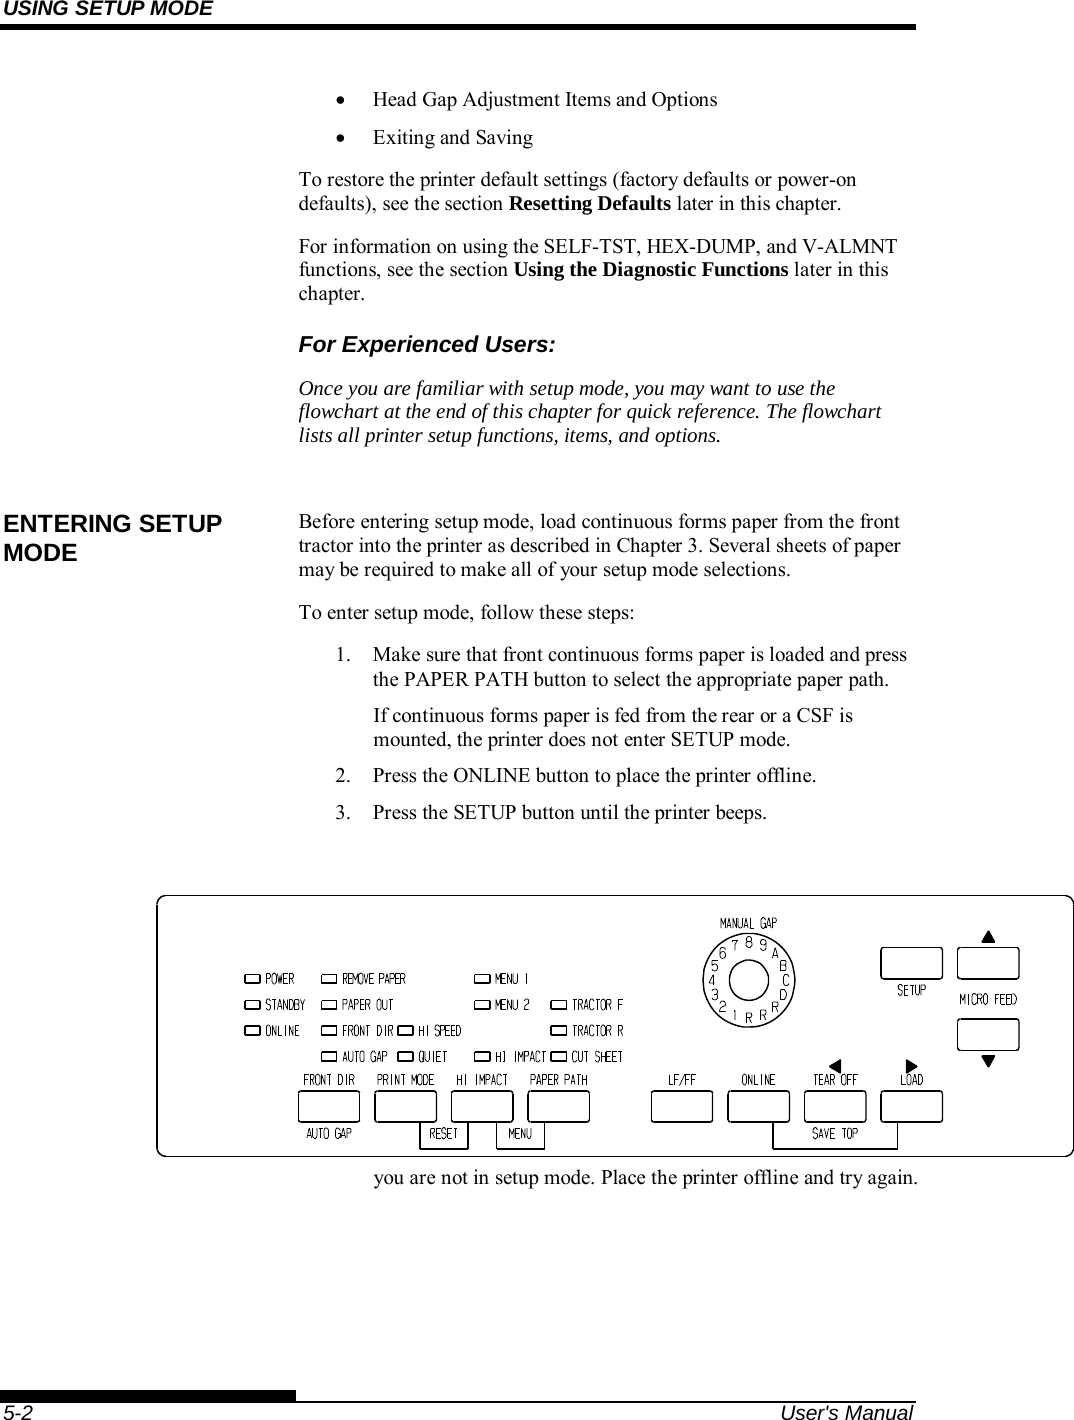 USING SETUP MODE    5-2  User&apos;s Manual   Head Gap Adjustment Items and Options   Exiting and Saving To restore the printer default settings (factory defaults or power-on defaults), see the section Resetting Defaults later in this chapter. For information on using the SELF-TST, HEX-DUMP, and V-ALMNT functions, see the section Using the Diagnostic Functions later in this chapter. For Experienced Users: Once you are familiar with setup mode, you may want to use the flowchart at the end of this chapter for quick reference. The flowchart lists all printer setup functions, items, and options.  Before entering setup mode, load continuous forms paper from the front tractor into the printer as described in Chapter 3. Several sheets of paper may be required to make all of your setup mode selections. To enter setup mode, follow these steps: 1.  Make sure that front continuous forms paper is loaded and press the PAPER PATH button to select the appropriate paper path. If continuous forms paper is fed from the rear or a CSF is mounted, the printer does not enter SETUP mode. 2.  Press the ONLINE button to place the printer offline. 3.  Press the SETUP button until the printer beeps.         Entering setup mode If you do not hear a beep or an alarm beep (beeps four times), you are not in setup mode. Place the printer offline and try again. ENTERING SETUP MODE 